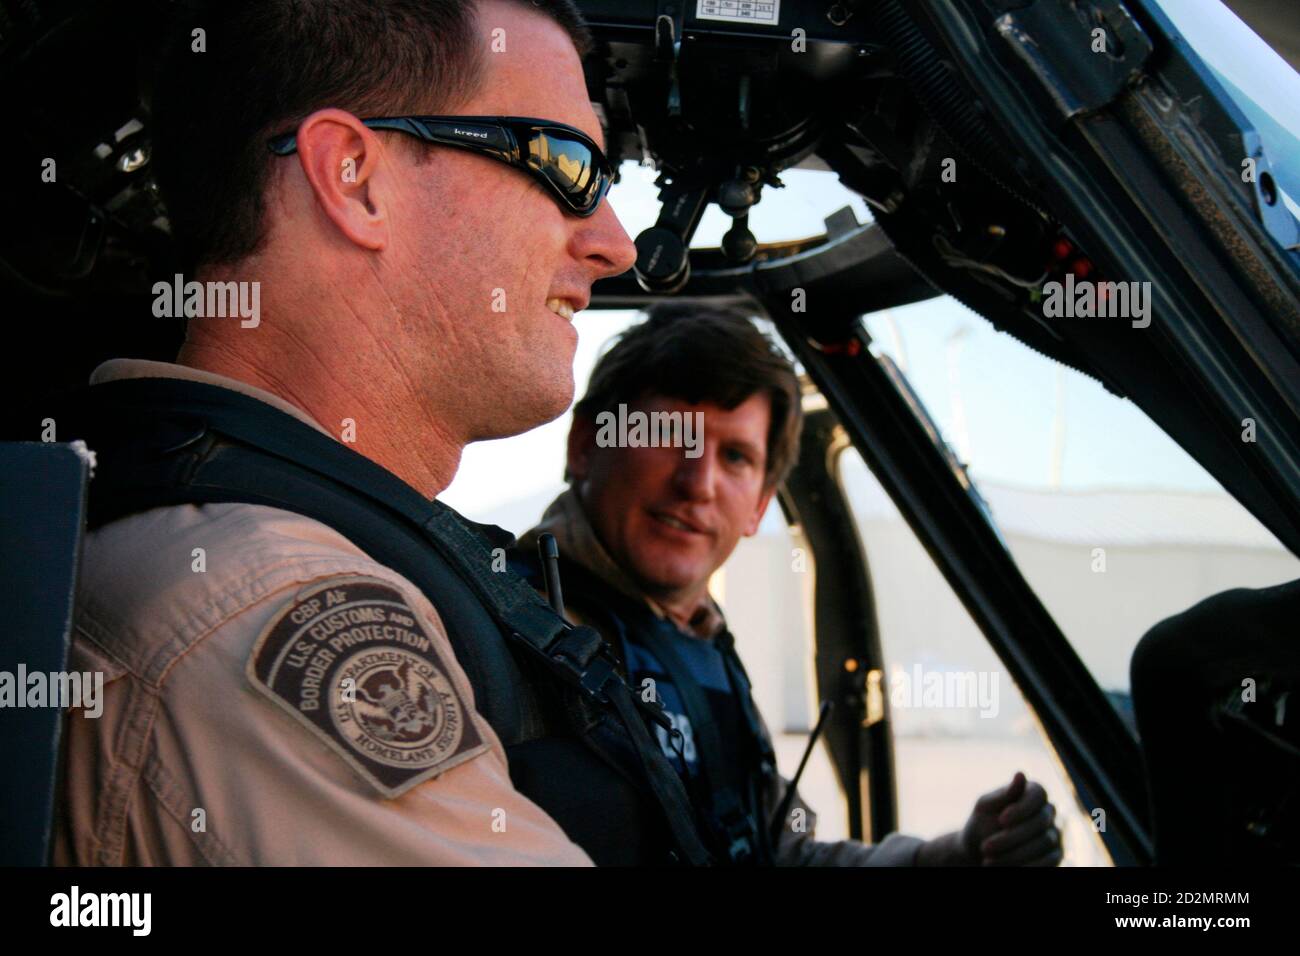 U.S. Customs and Border Protection pilots Wade Koontz (L) and Rich Rouviere ready a Black Hawk helicopter for a mission south of Tucson, Arizona, August 21, 2007. Crews in the fast military helicopters work closely with the CBP Predator B spy drones, in a pioneering program to spot and arrest drug traffickers and illegal immigrants crossing the desert from Mexico. The program is to be extended to parts of the northern border with Canada and the U.S. Gulf coast in coming months.      To match feature USA-IMMIGRATION/BLACKHAWKS  Picture taken August 21, 2007.  REUTERS/Tim Gaynor     (UNITED STAT Stock Photo